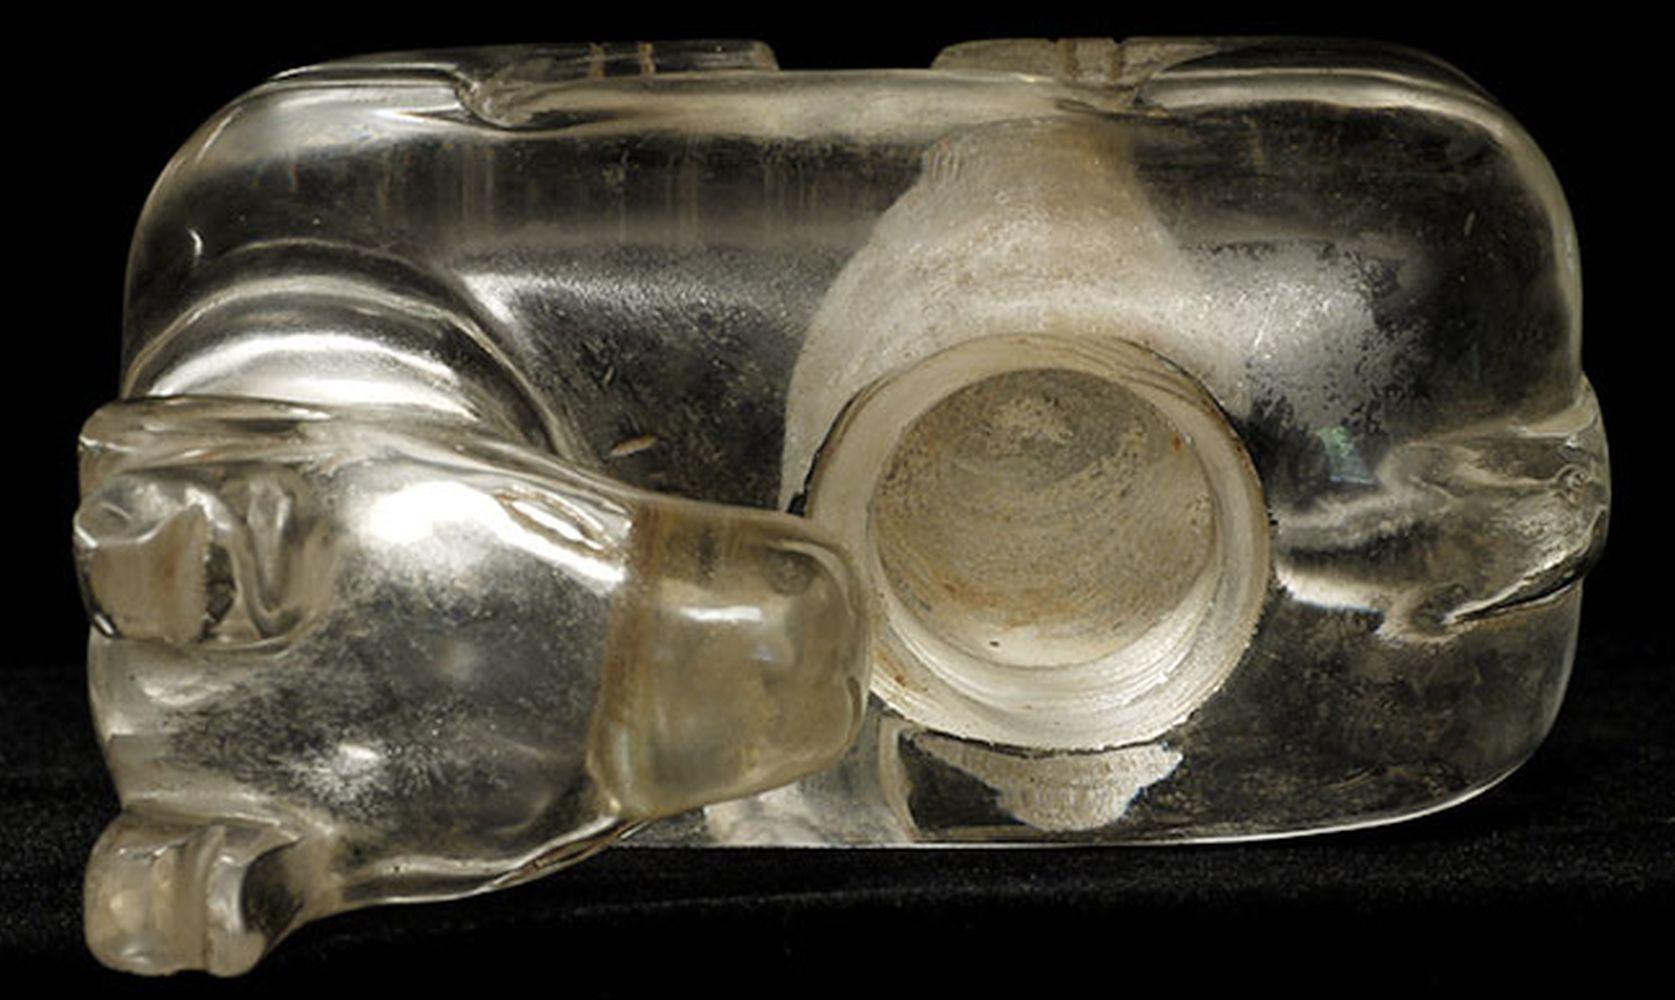 17thC or Earlier Northern Thai Quartz Crystal Reliquary - 5920 For Sale 5